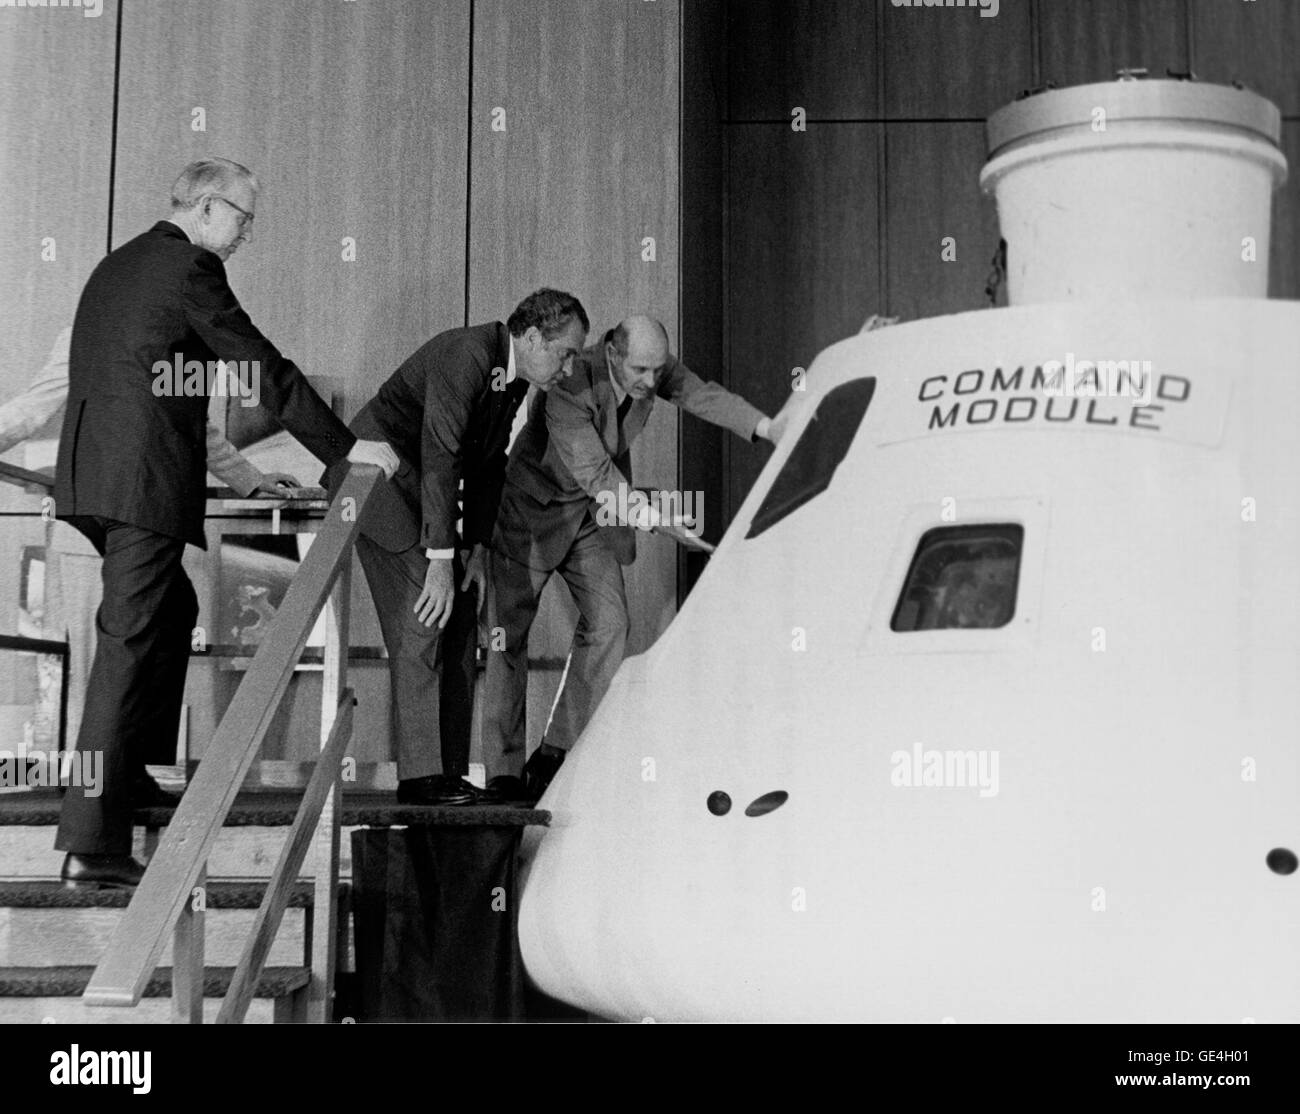 (April 1, 1974) President Richard M. Nixon is given a briefing on the Apollo Command Module similar to the one that will be flown on the upcoming joint U.S./U.S.S.R. Apollo-Soyuz test flight in the summer of 1975. Conducting the tour is the American Commander for the flight, astronaut Thomas P. Stafford. Standing at the President's right is Dr. James C. Fletcher, NASA Administrator.                                                                  Image # : 74-H-236 Stock Photo